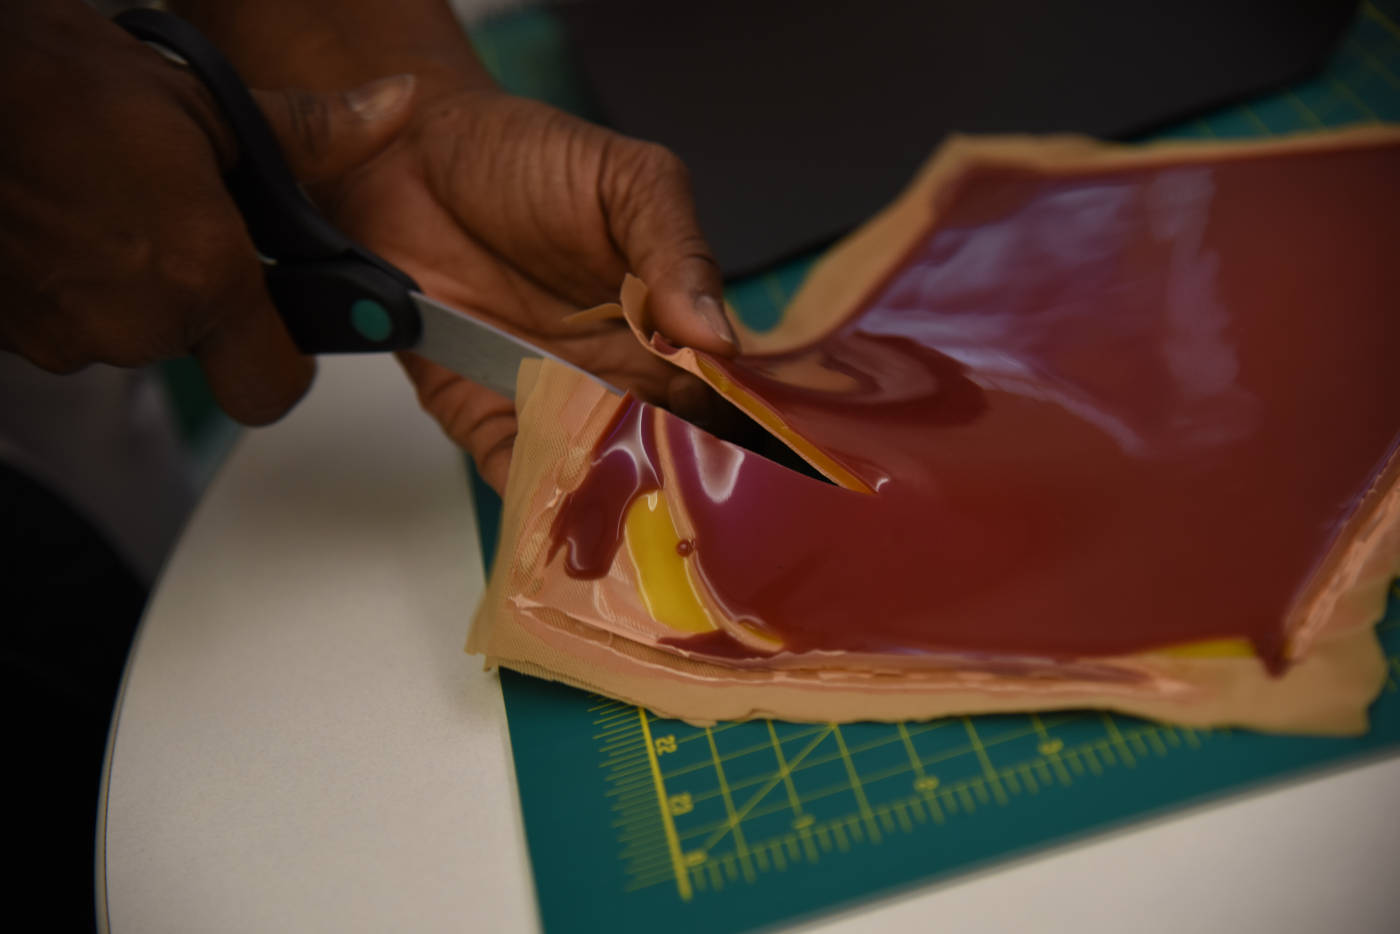 A synthetic skin for suture training that the prototyping team made with silicone